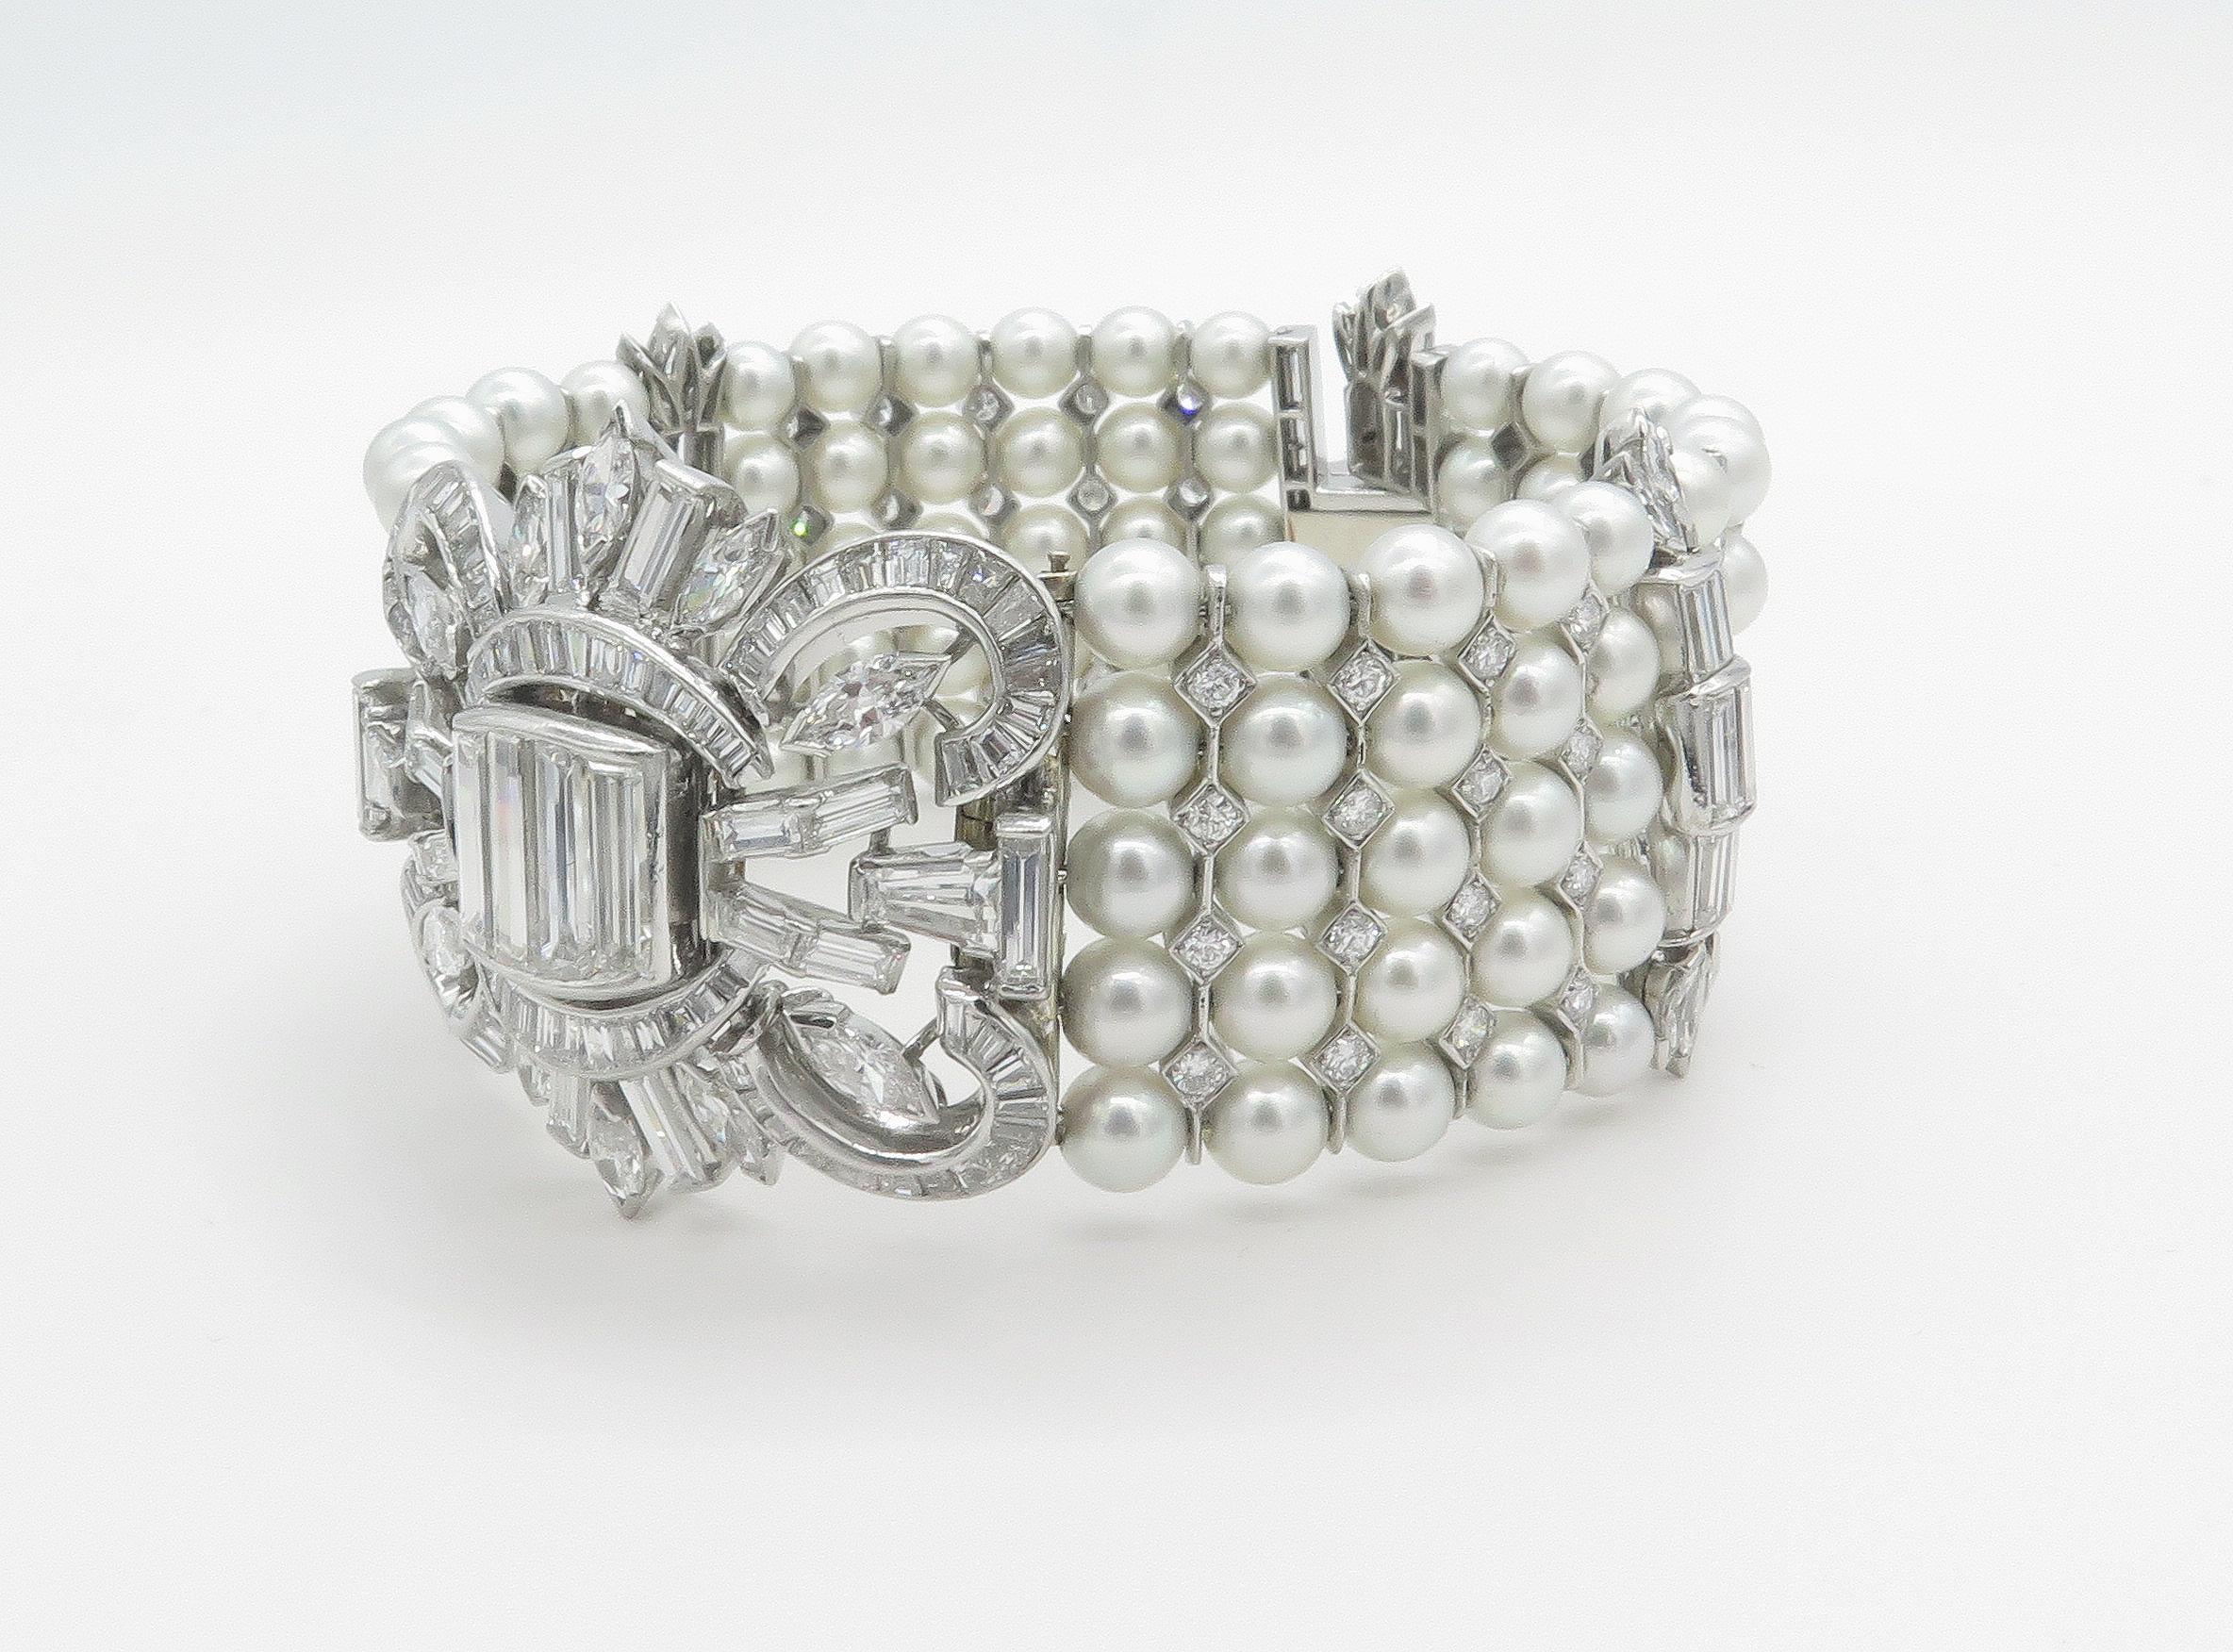 One of the finest pearl and diamond bracelets we have been lucky enough to offer. This platinum pearl and diamond bracelet contains on or about 15 carats of Fine quality diamonds and 5mm cultured pearls. 7 inches long . It boasts a beautiful diamond